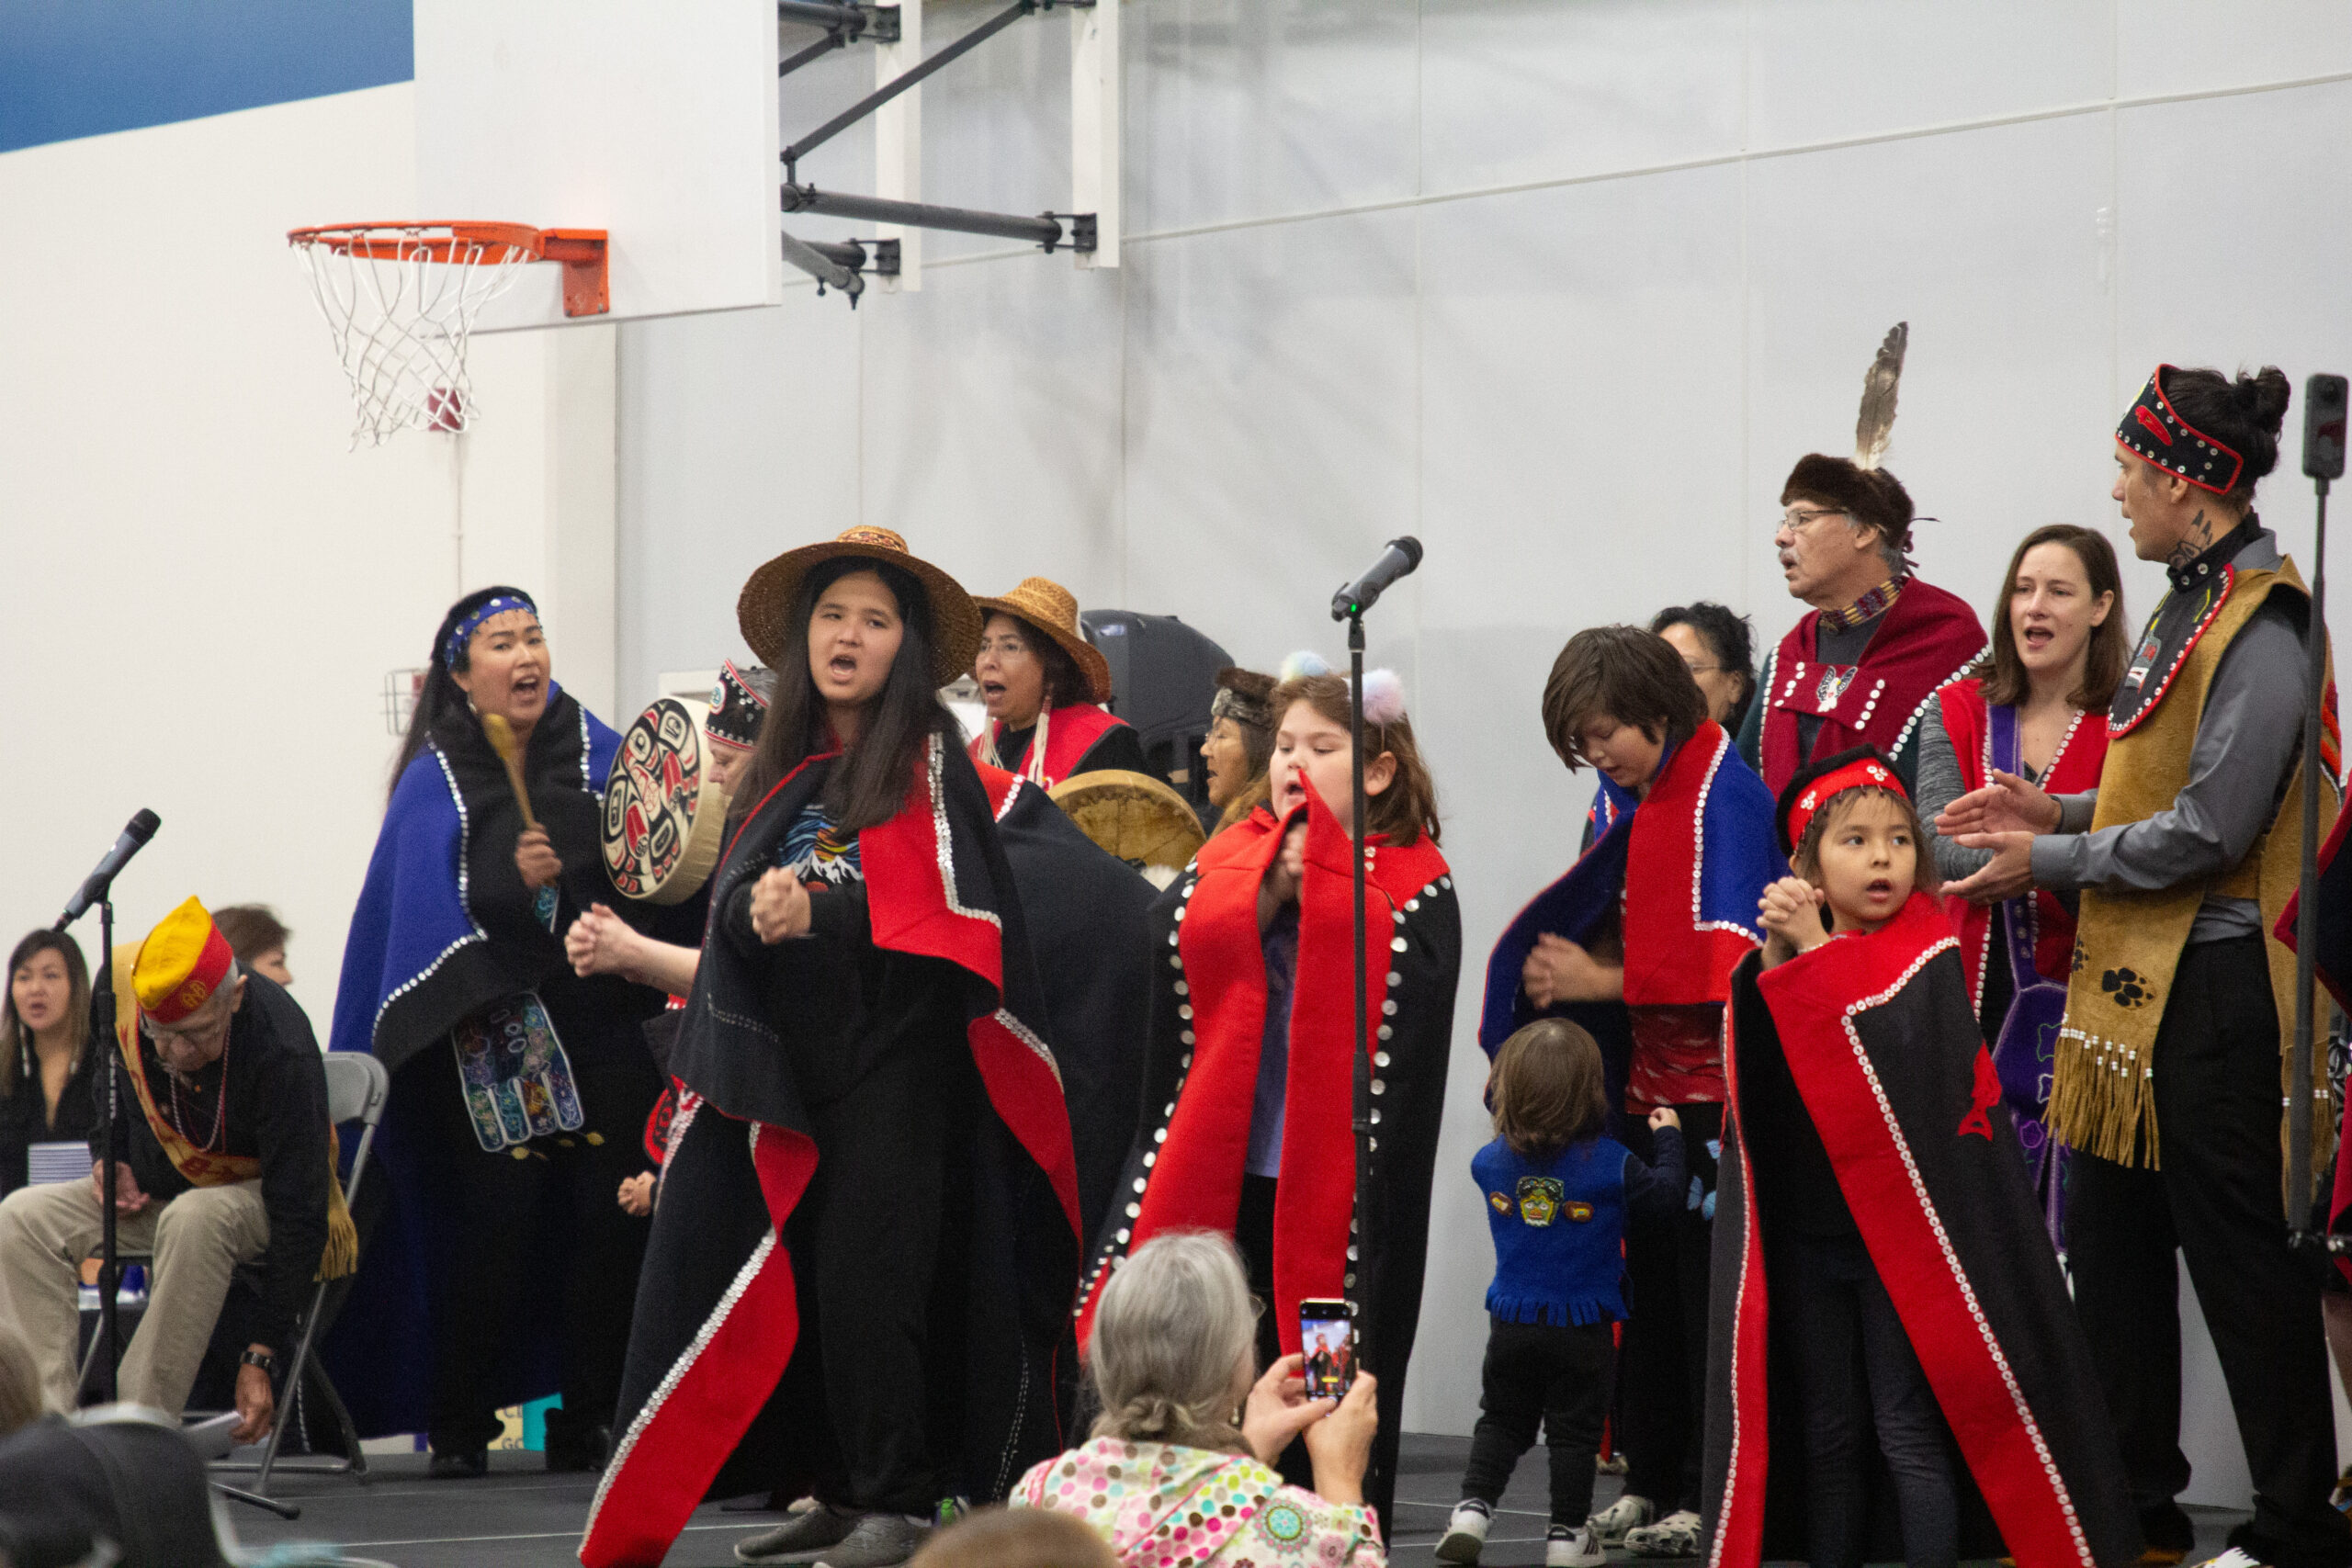 A group of dancers sing before a crowd on stage. Some holding drums, others clasing their hands together while wearing traditional Tlingit attire.